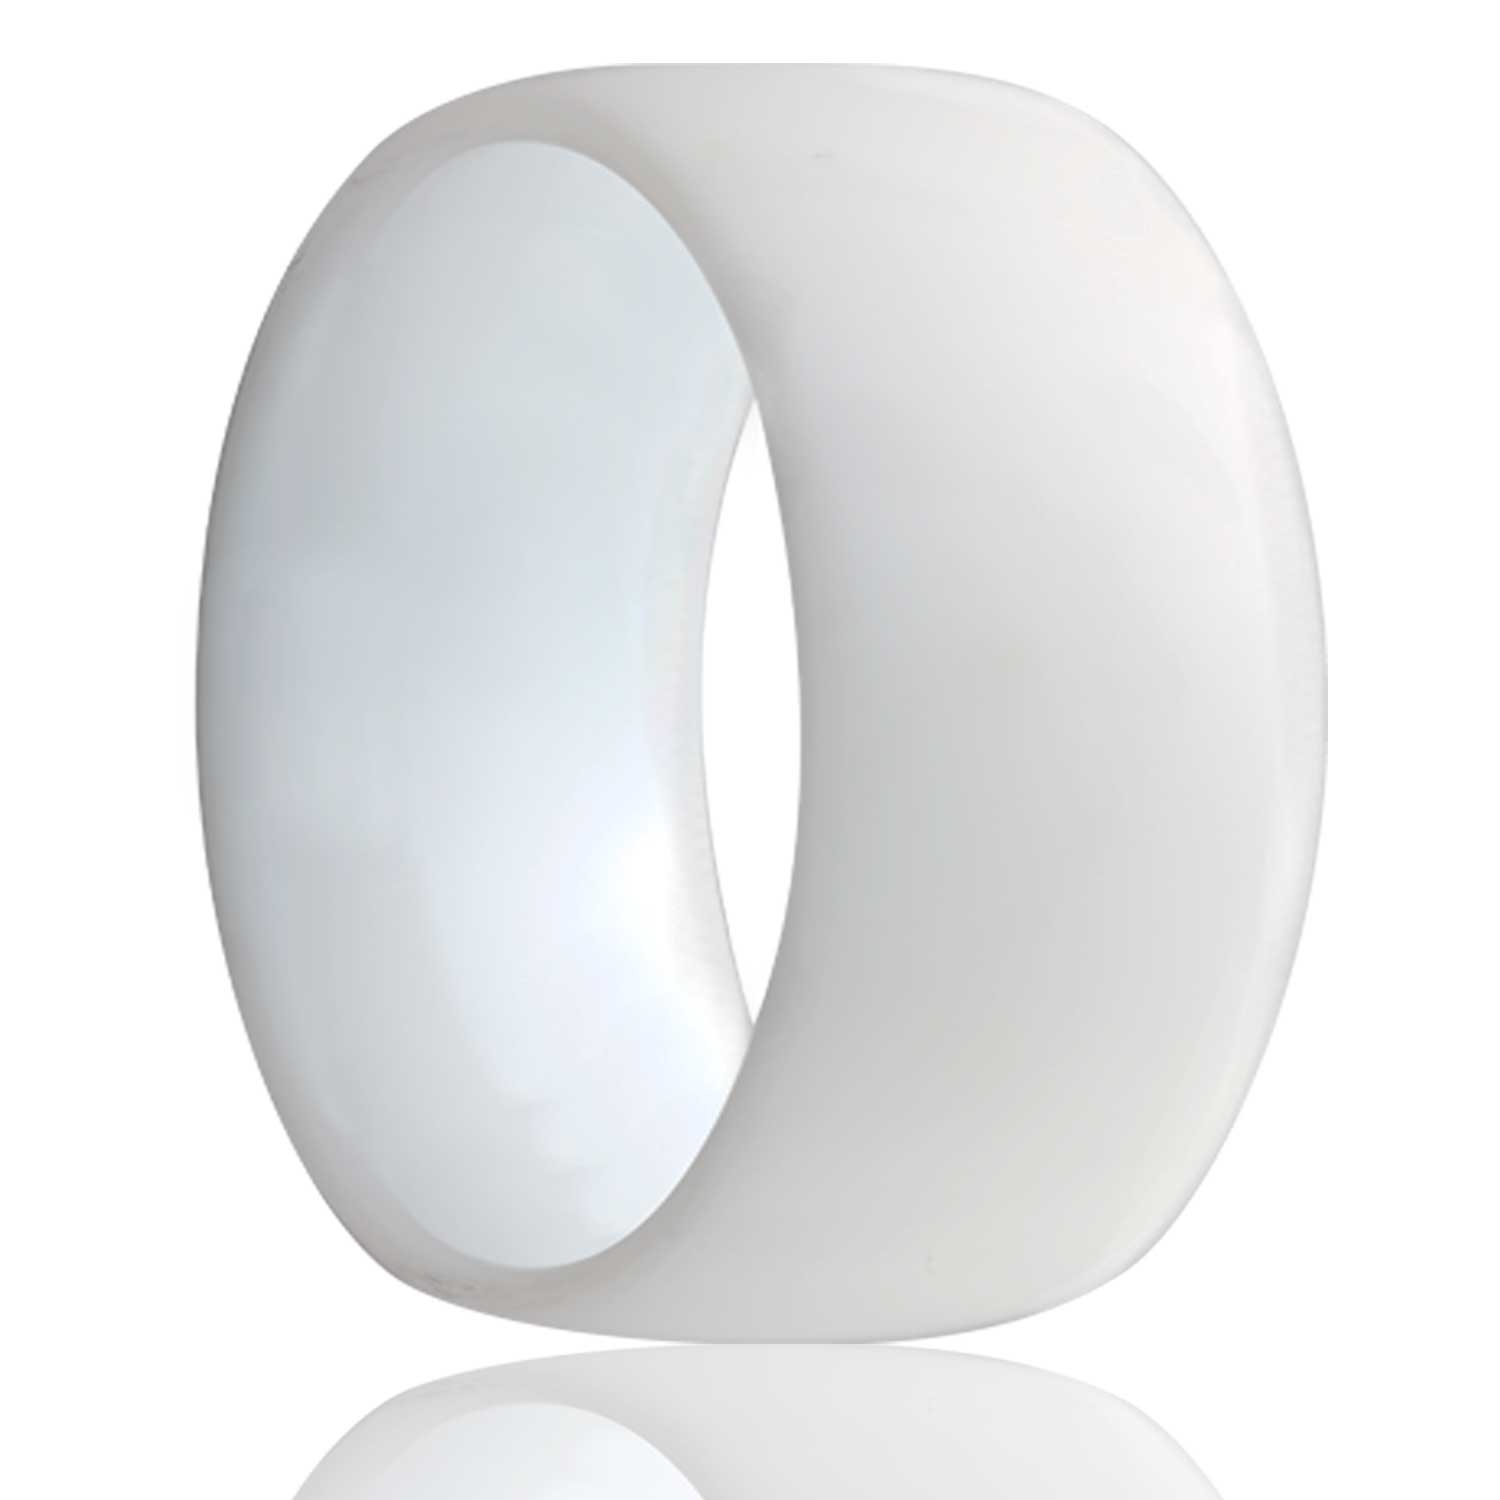 A domed sandblasted white black ceramic wedding band displayed on a neutral white background.